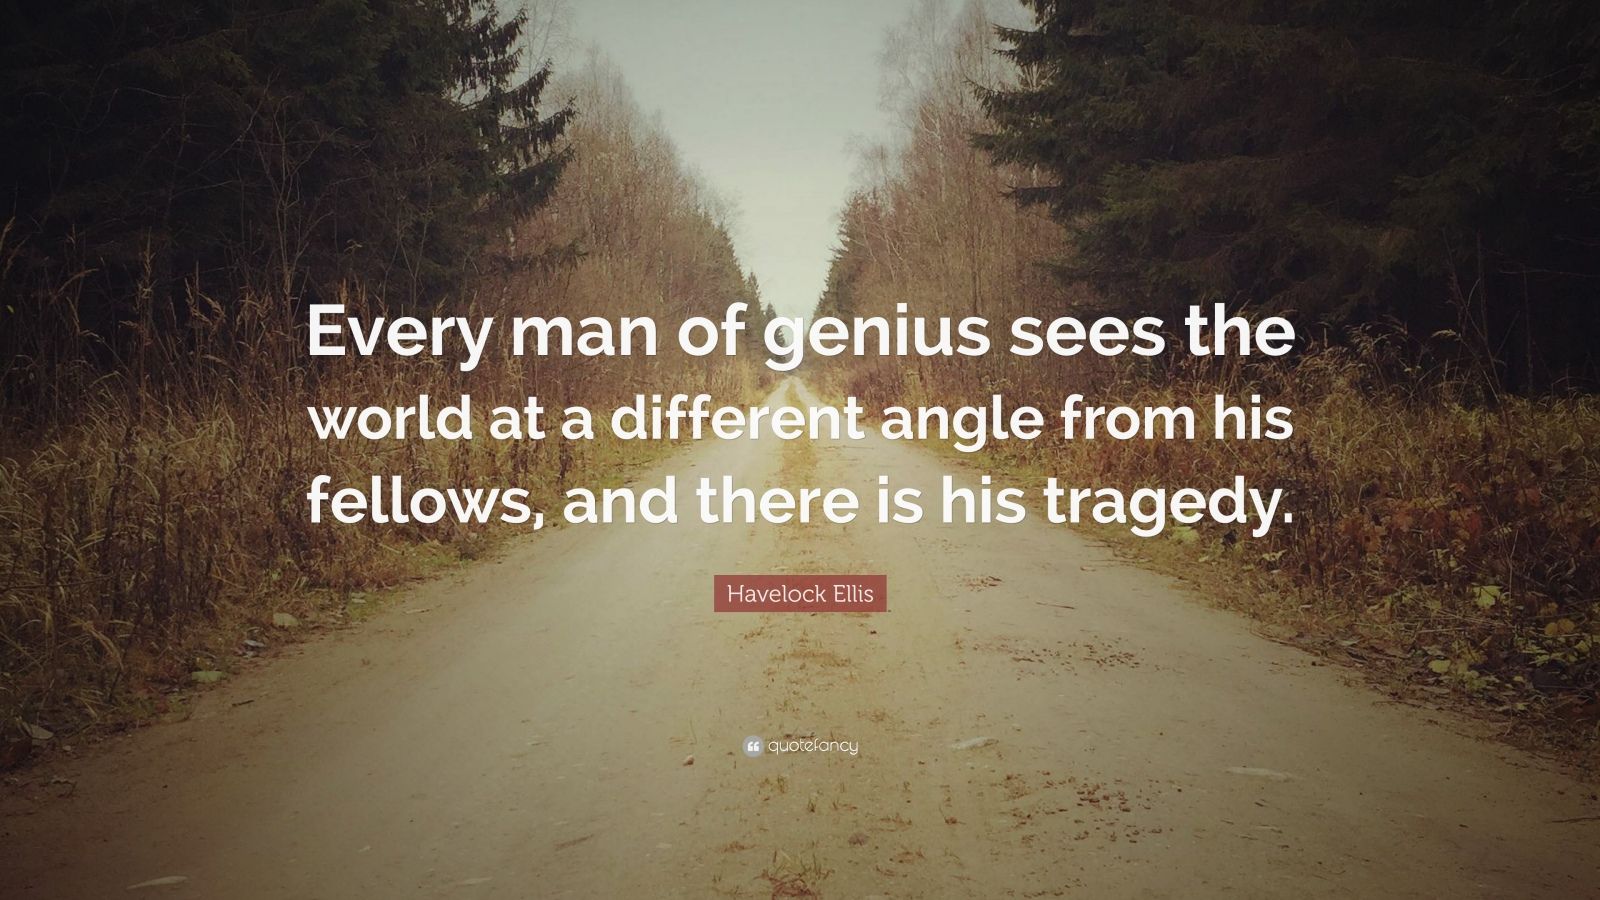 Havelock Ellis Quote: "Every man of genius sees the world ...